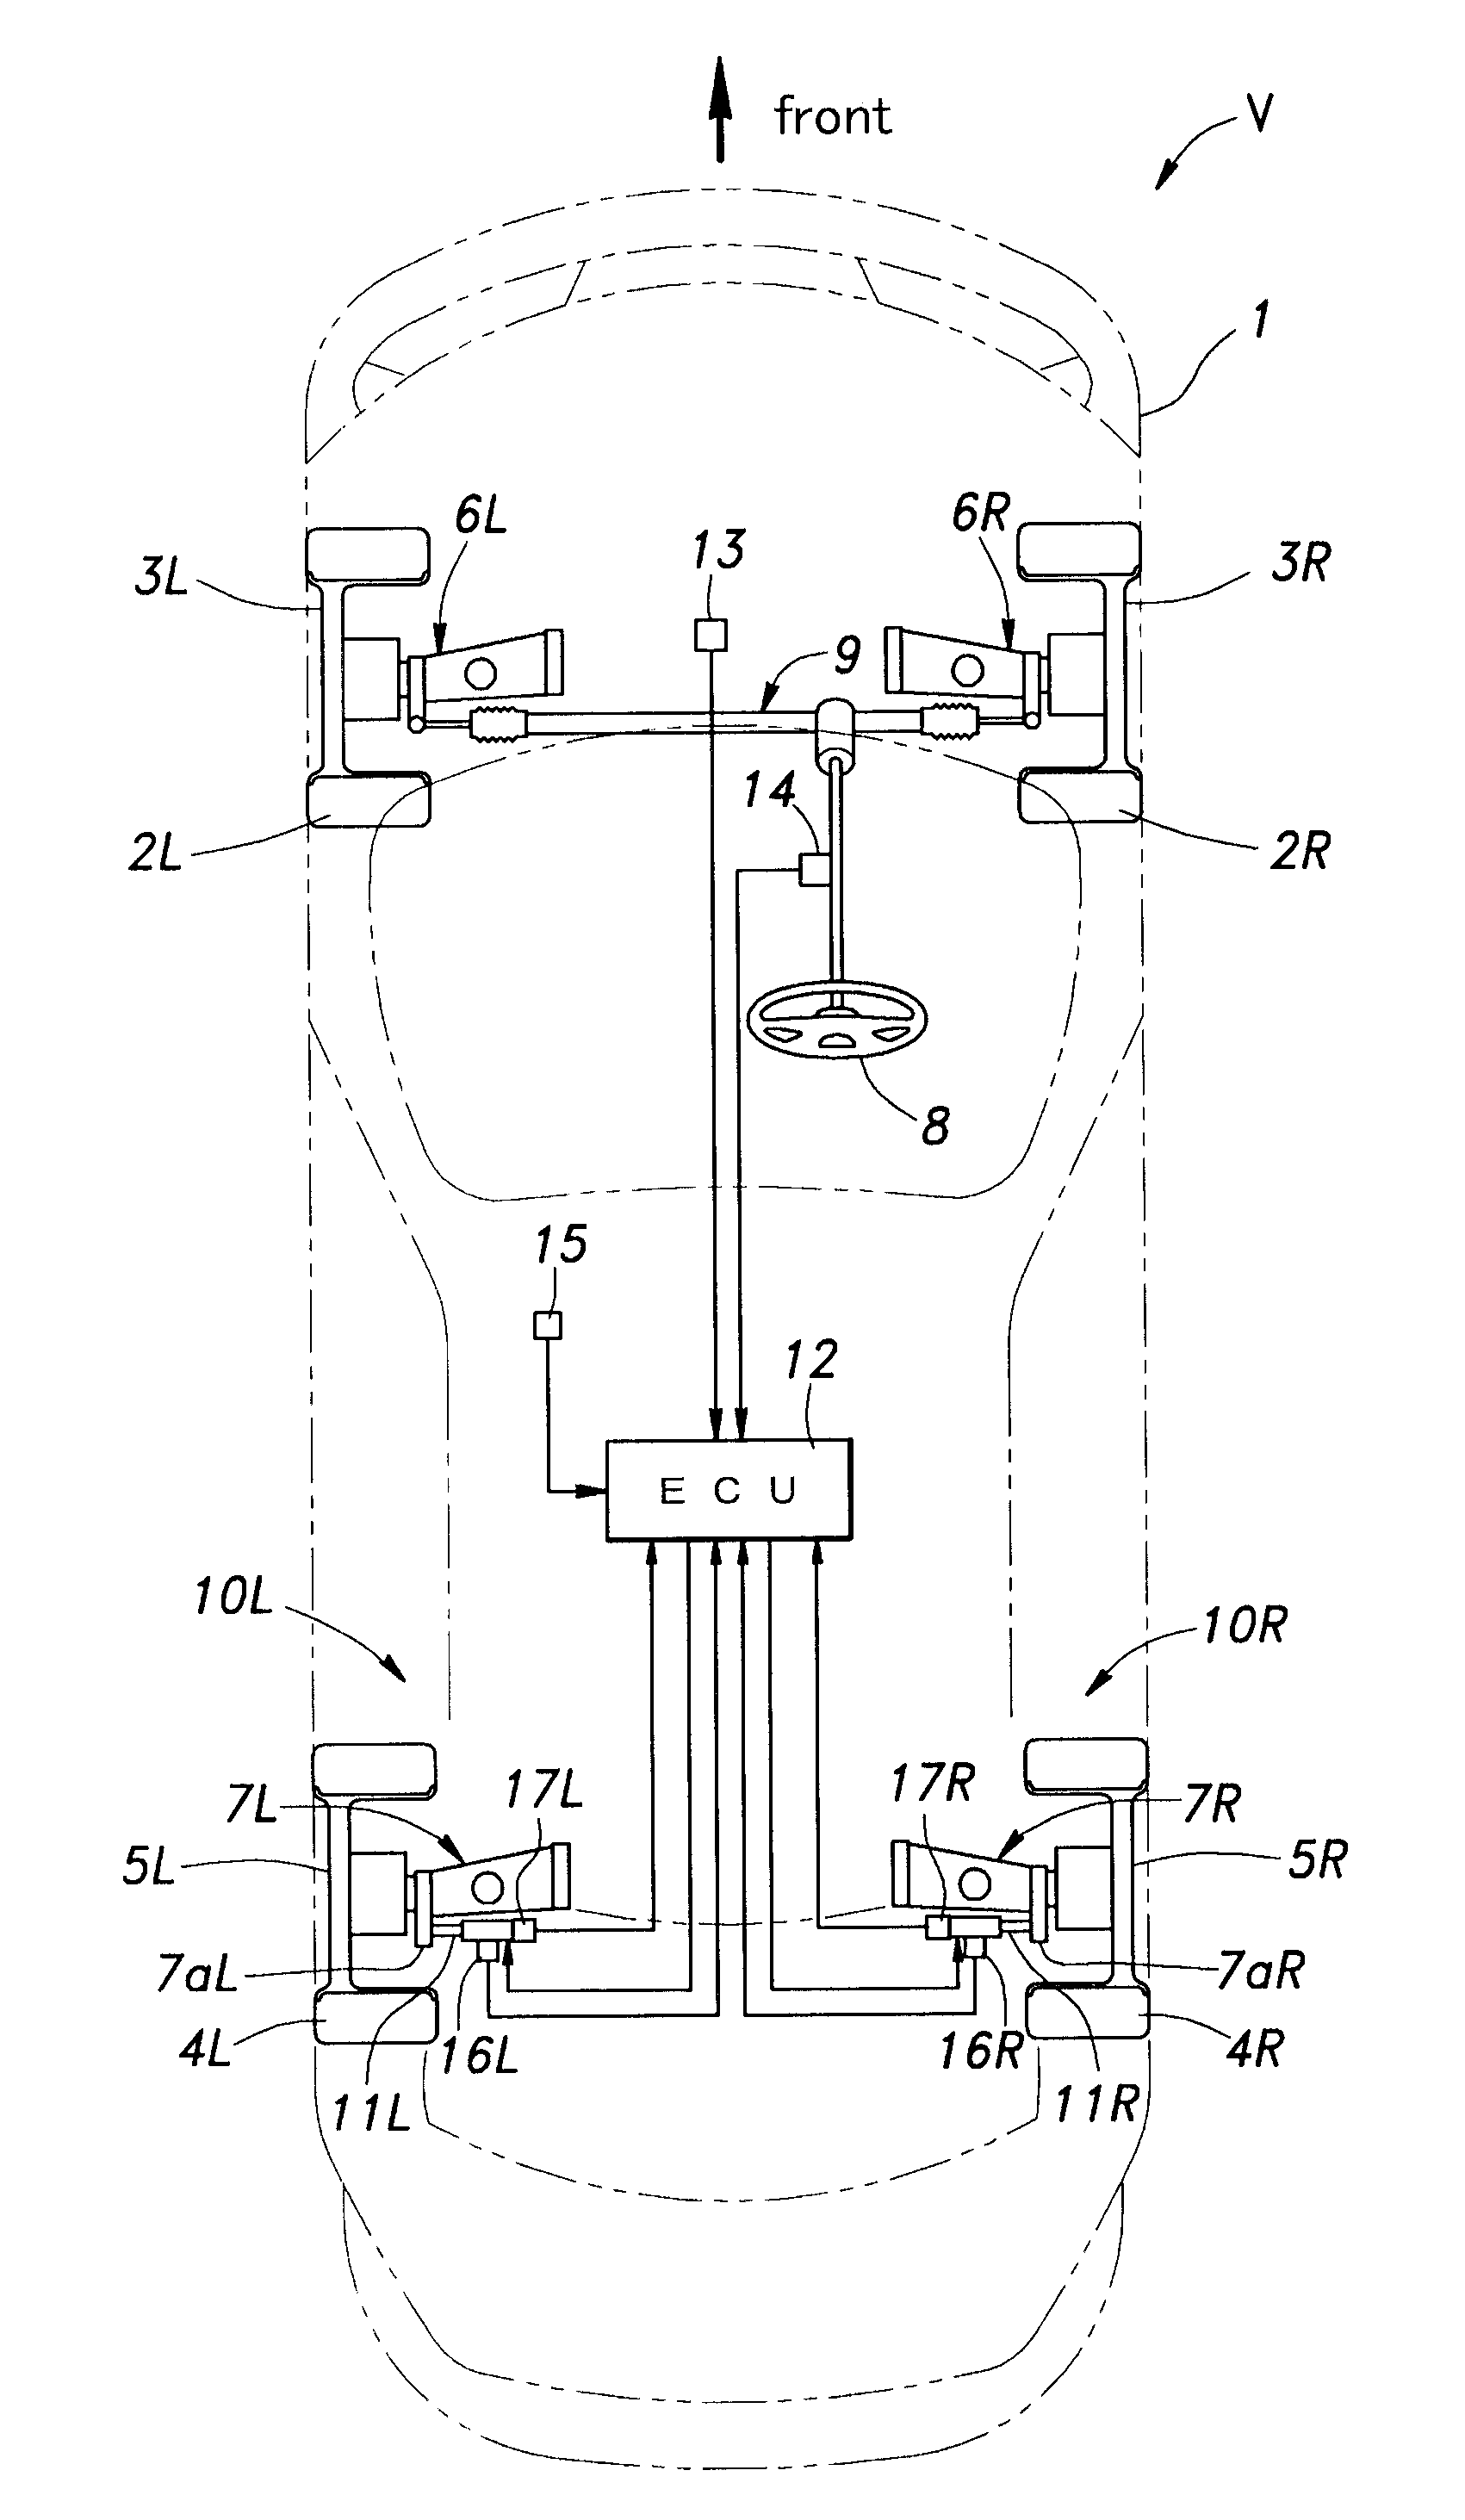 Rear wheel toe angle control device and method for calibrating a reference position of an electric actuator in a rear wheel toe angle control device